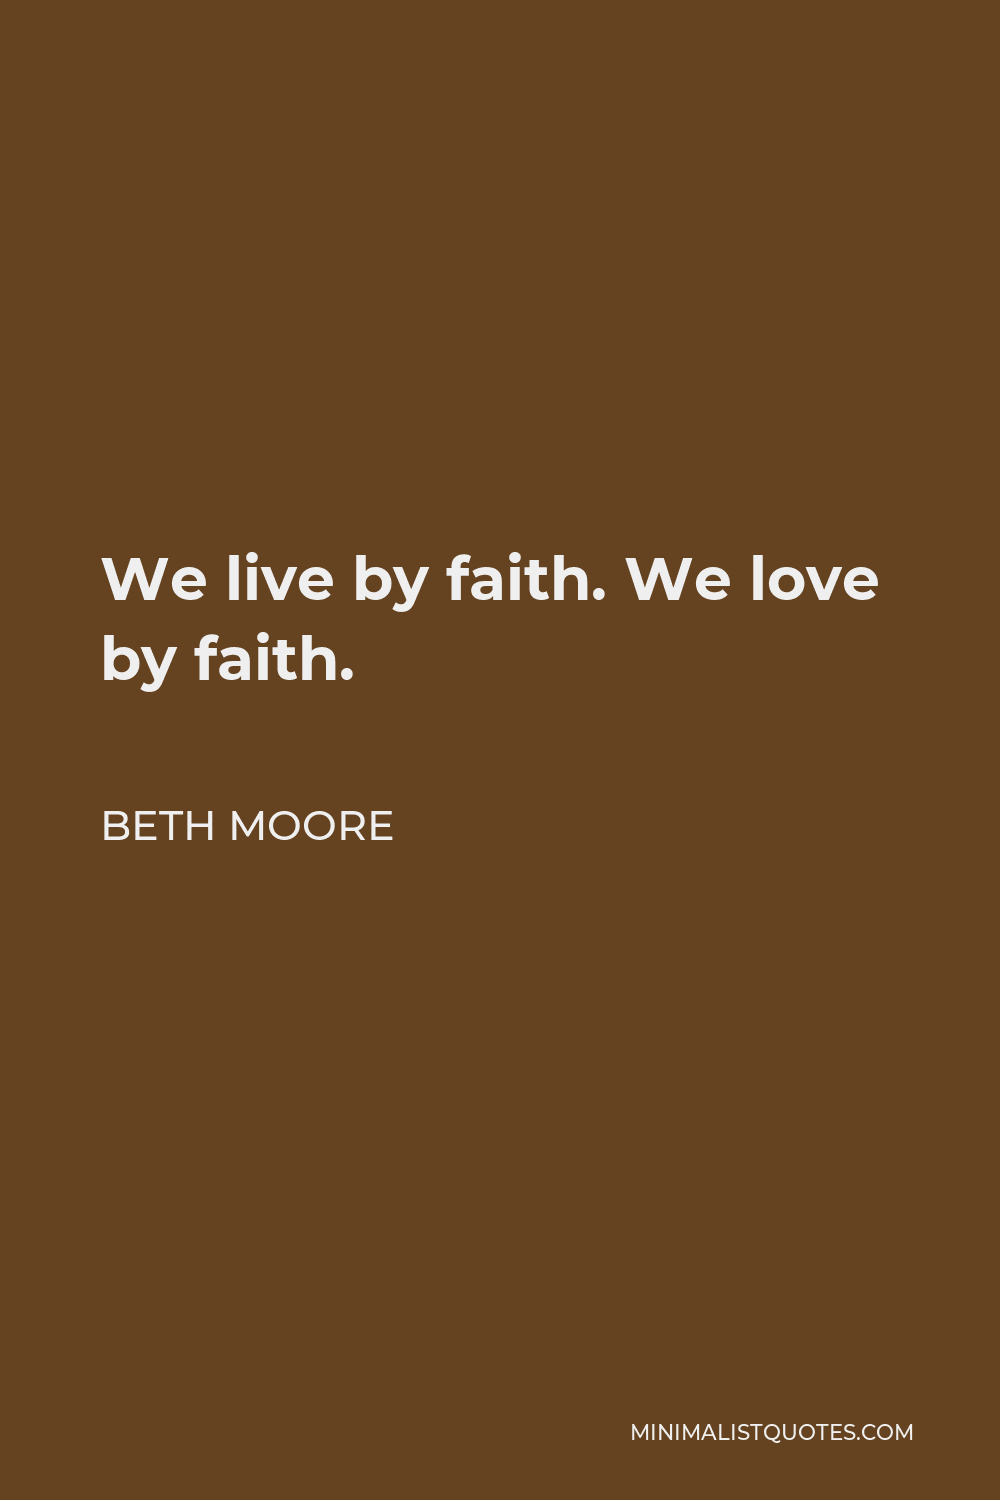 Beth Moore Quote - We live by faith. We love by faith.